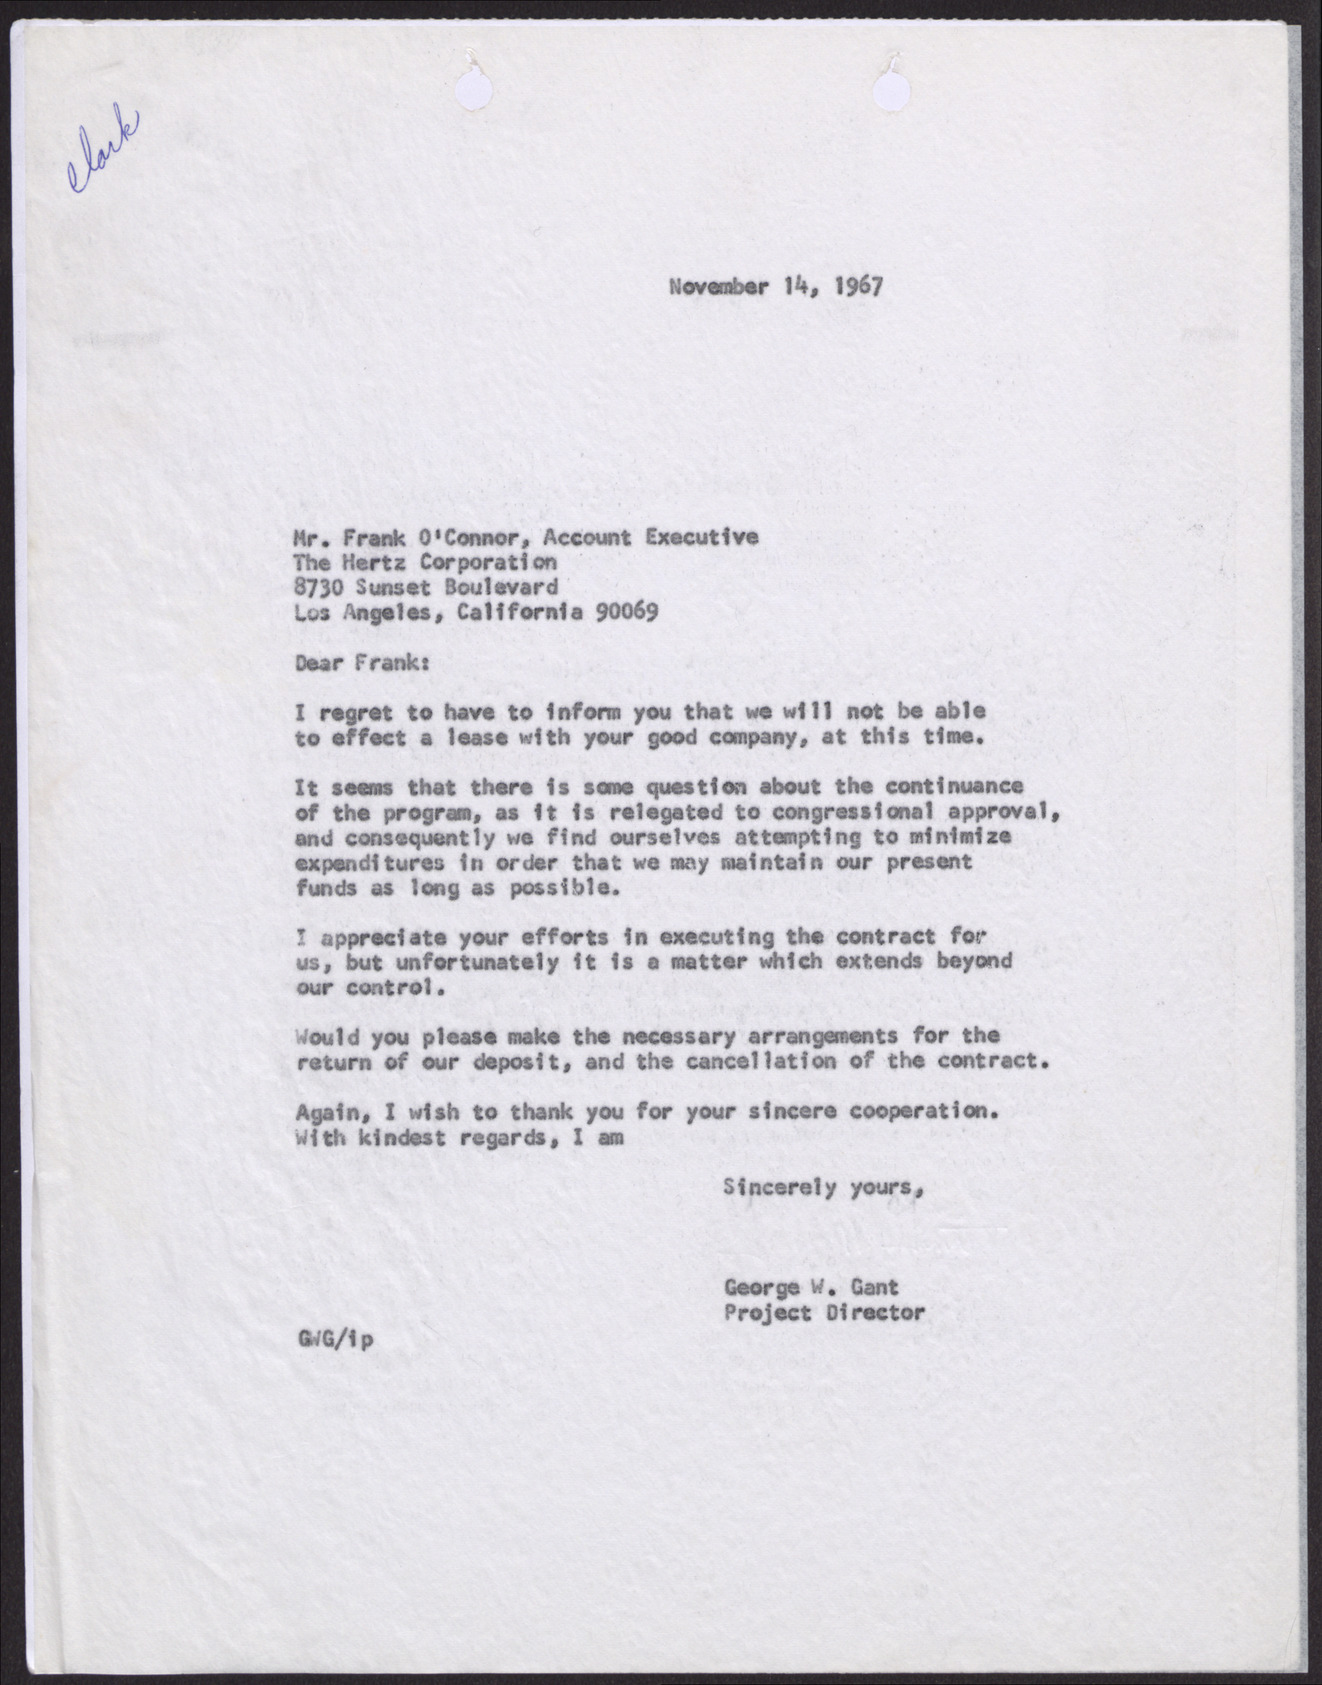 Letter to Mr. Frank O'Connor from George W. Gant, November 14, 1967